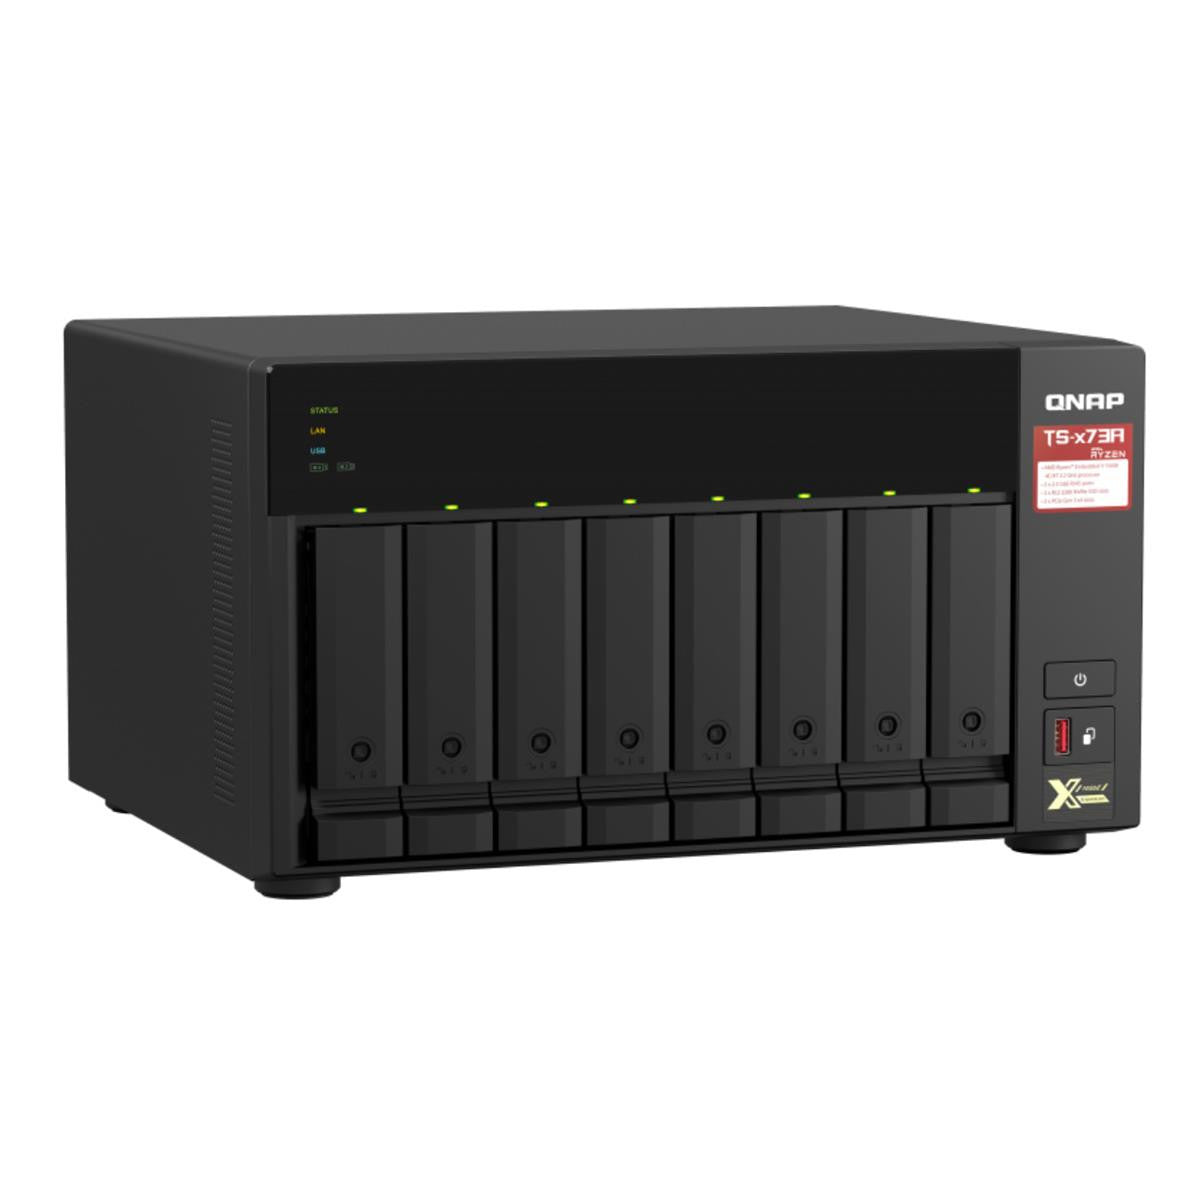 QNAP TS-873A 8-BAY NAS with 8GB DDR4 RAM and 64TB (8x8TB) Western Digital RED PLUS Drives Fully Assembled and Tested